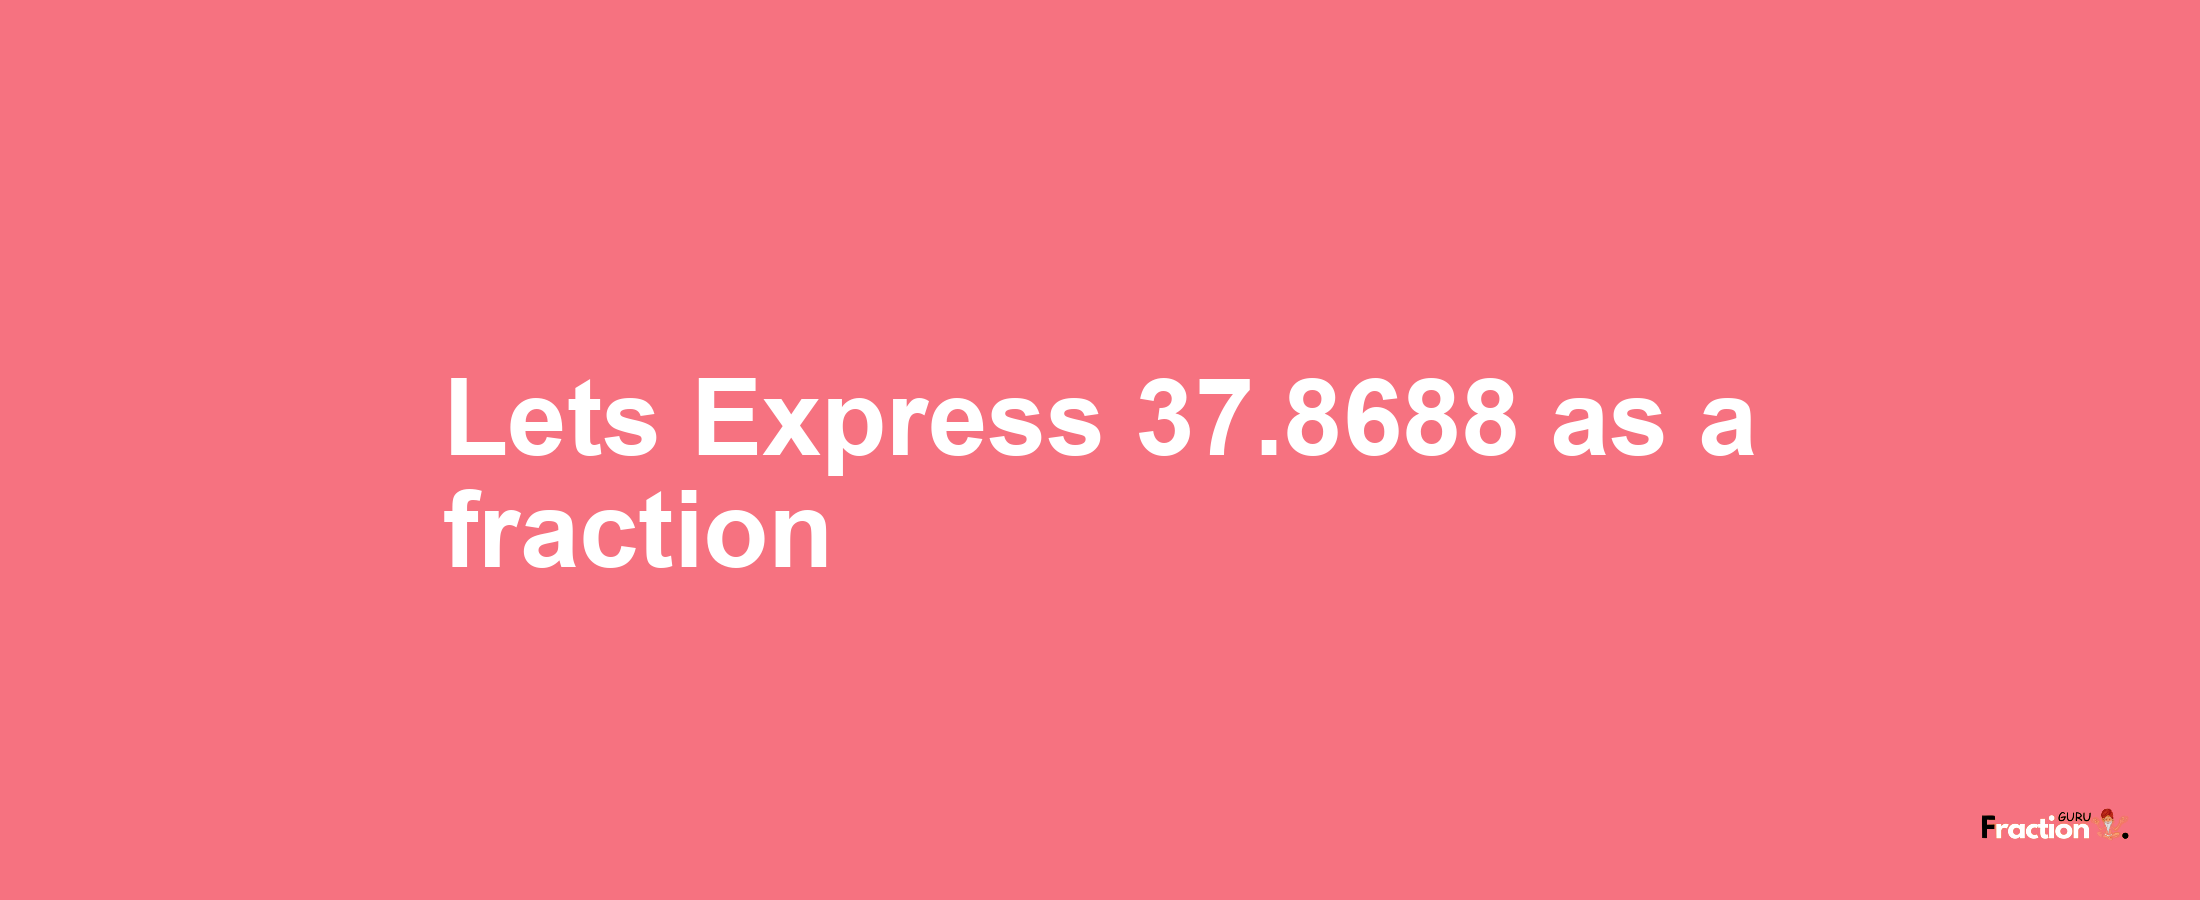 Lets Express 37.8688 as afraction